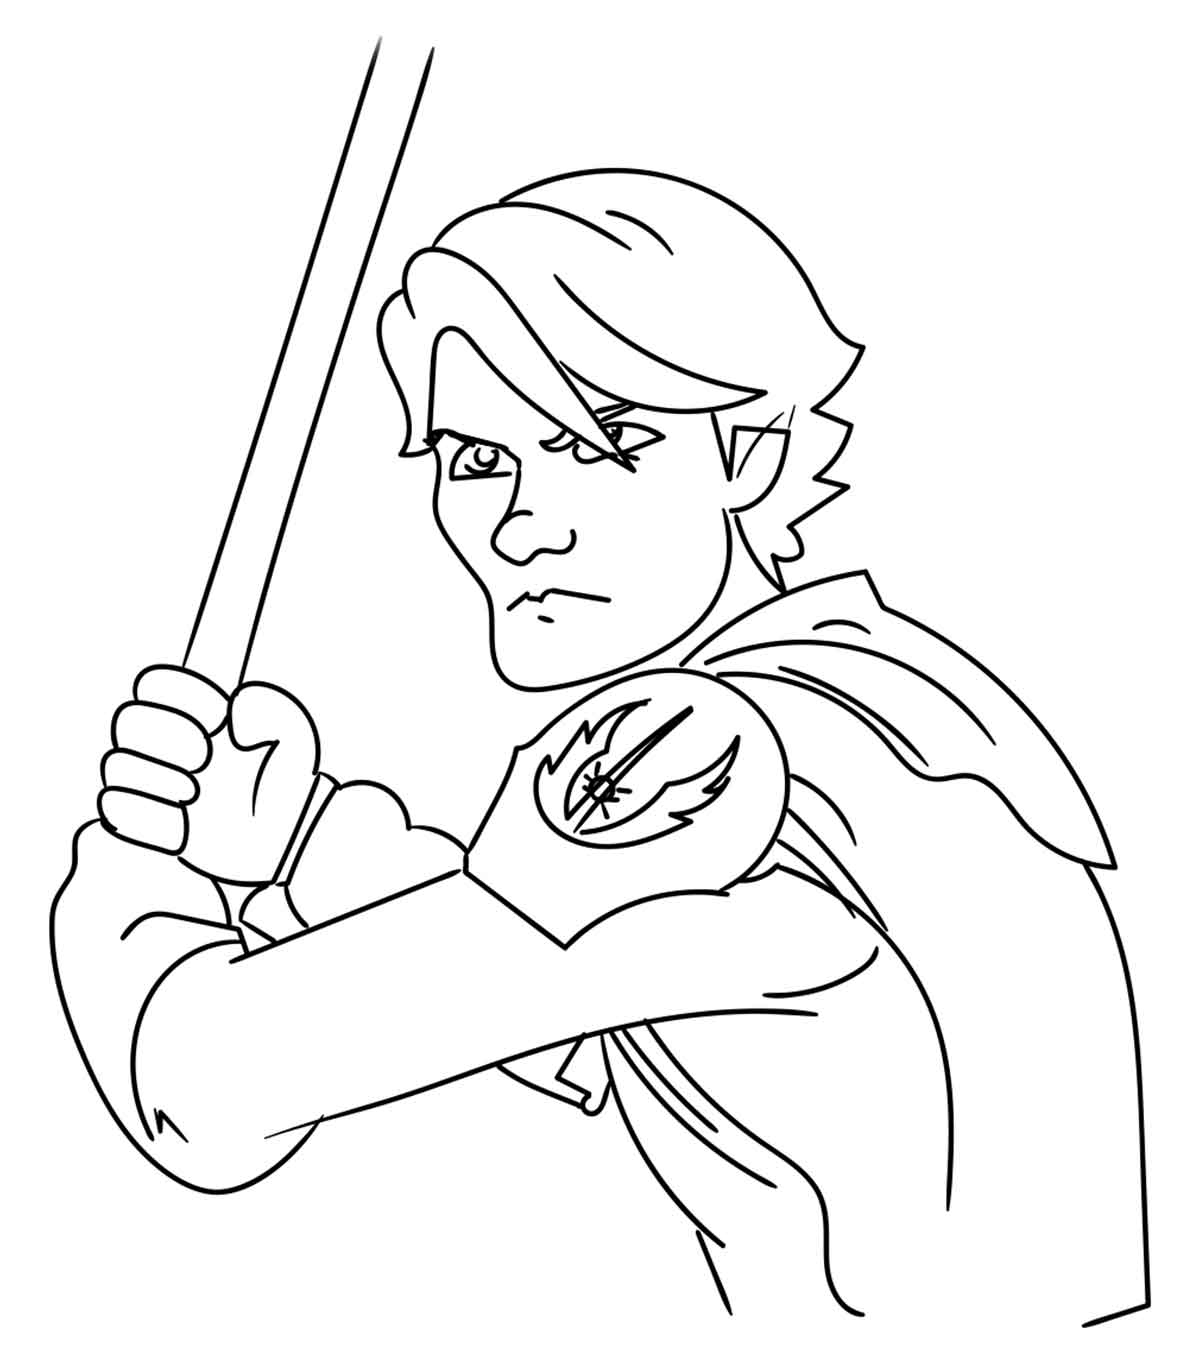 Download Star Wars Clone Wars Coloring Pages - Best Coloring Pages For Kids